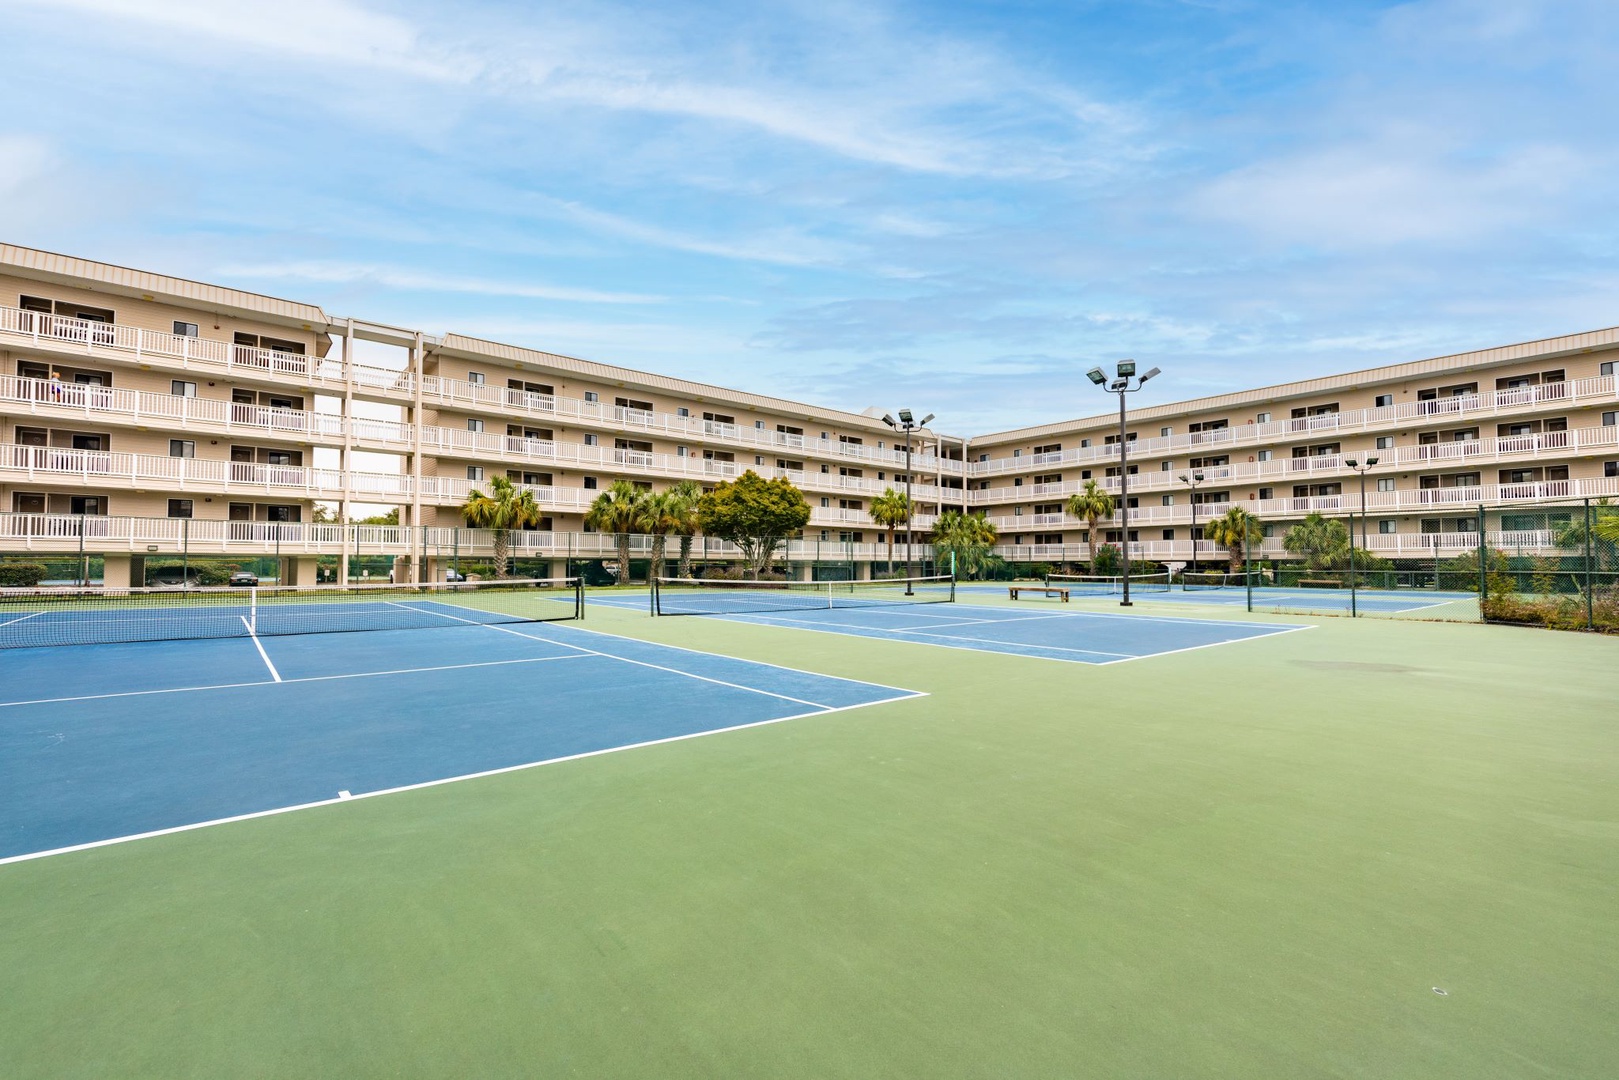 Bust out the rackets and get competitive at the community tennis courts